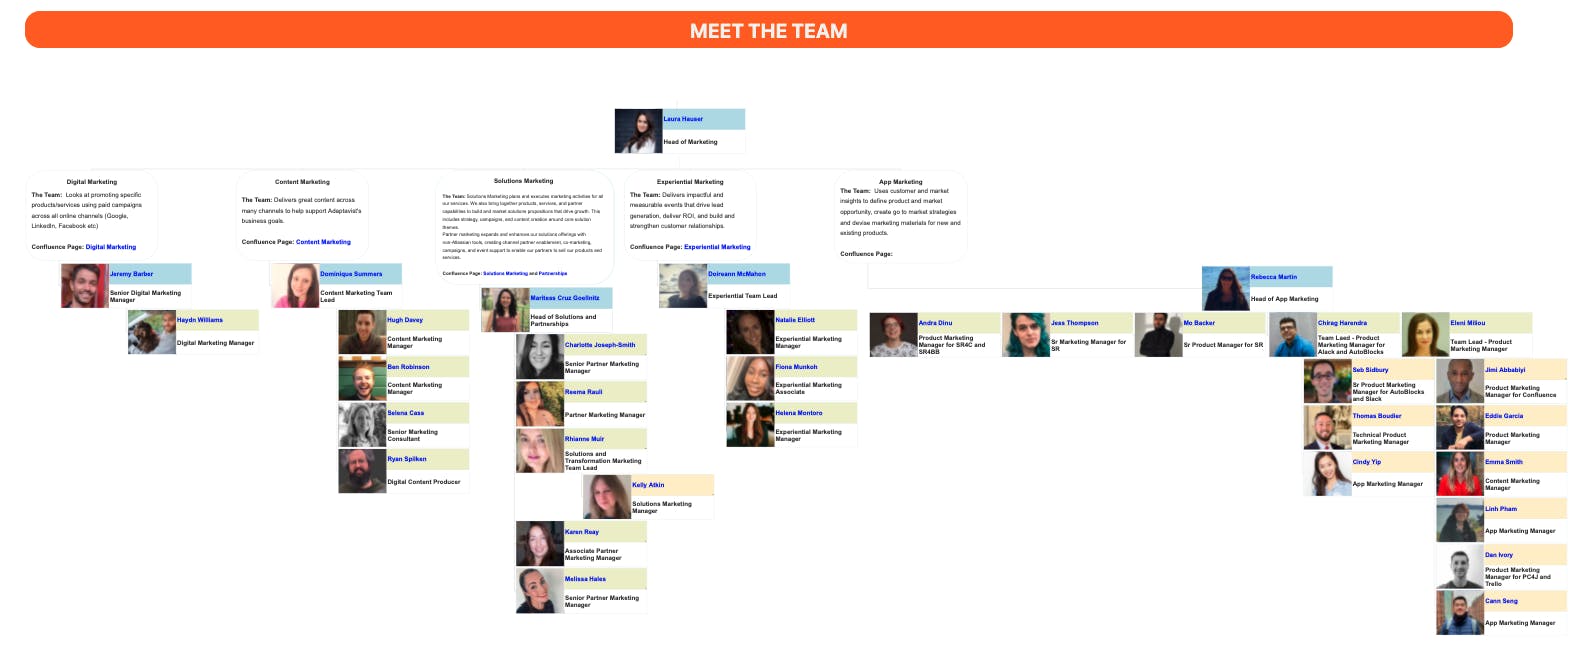 Screenshot of a company organisational chart, showing a map of profile photos and job titles